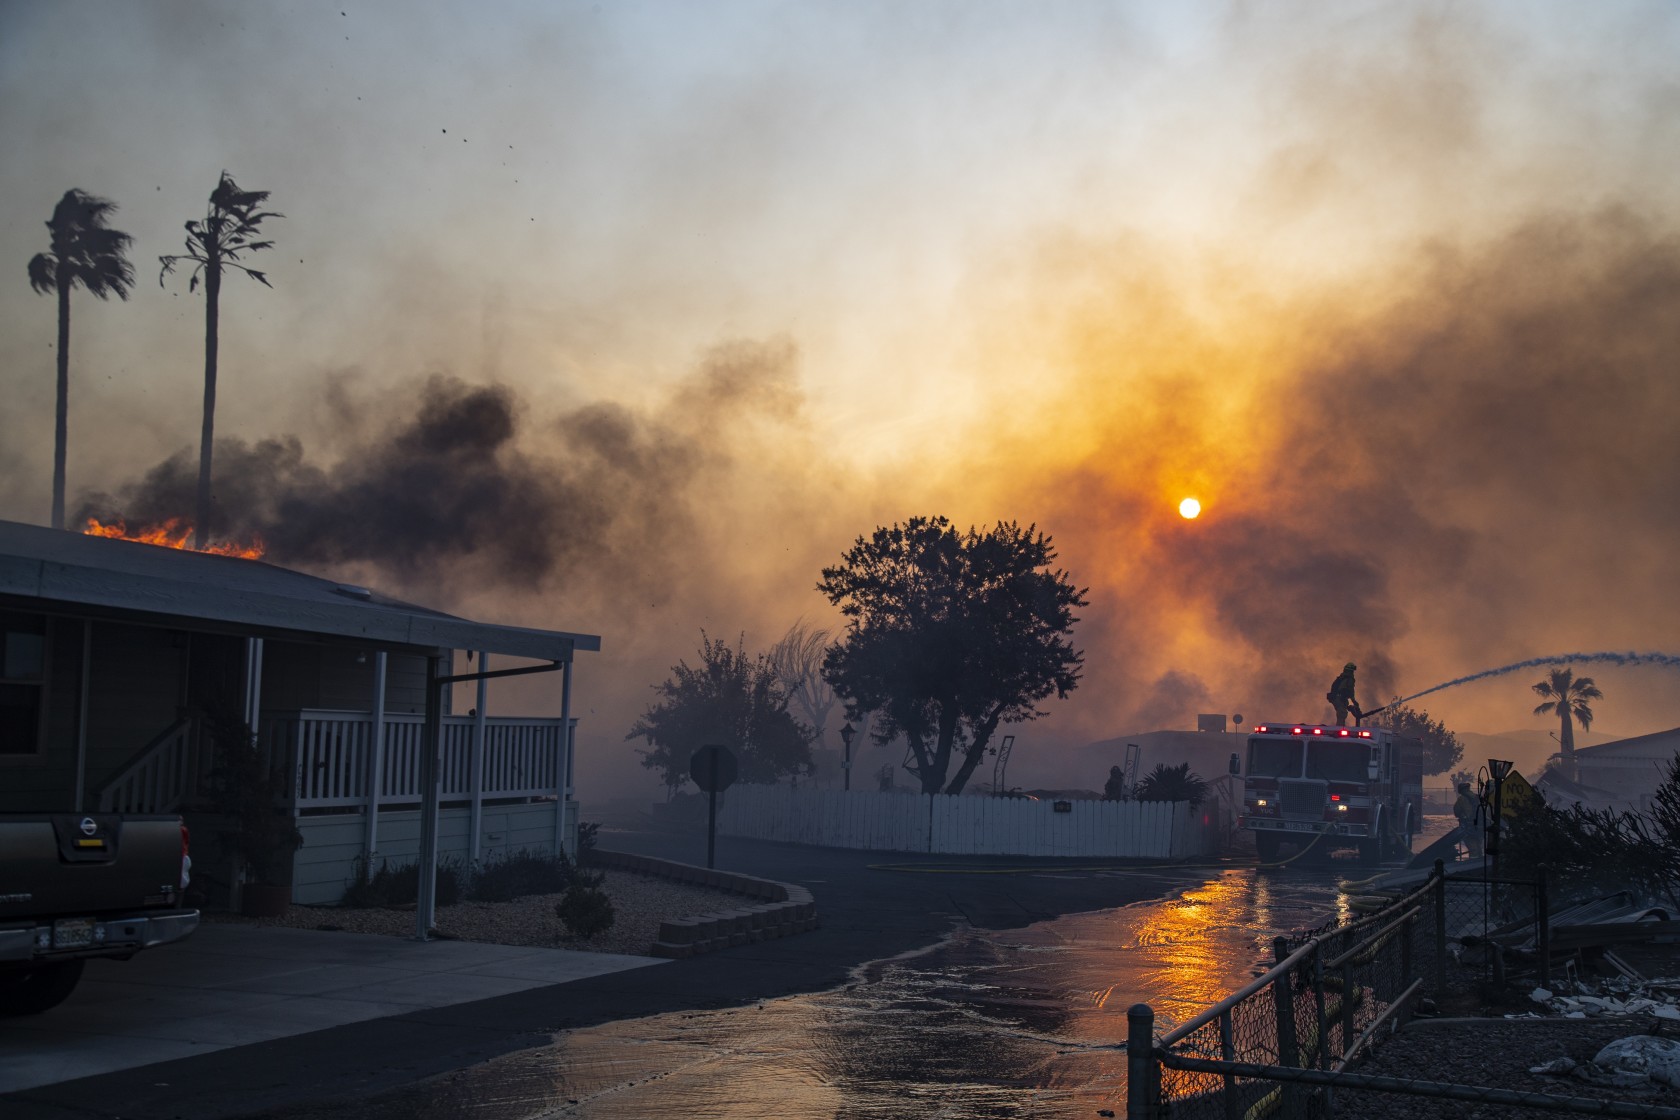 Fast-moving wildfire kills at least 1, destroys homes north of Los Angeles